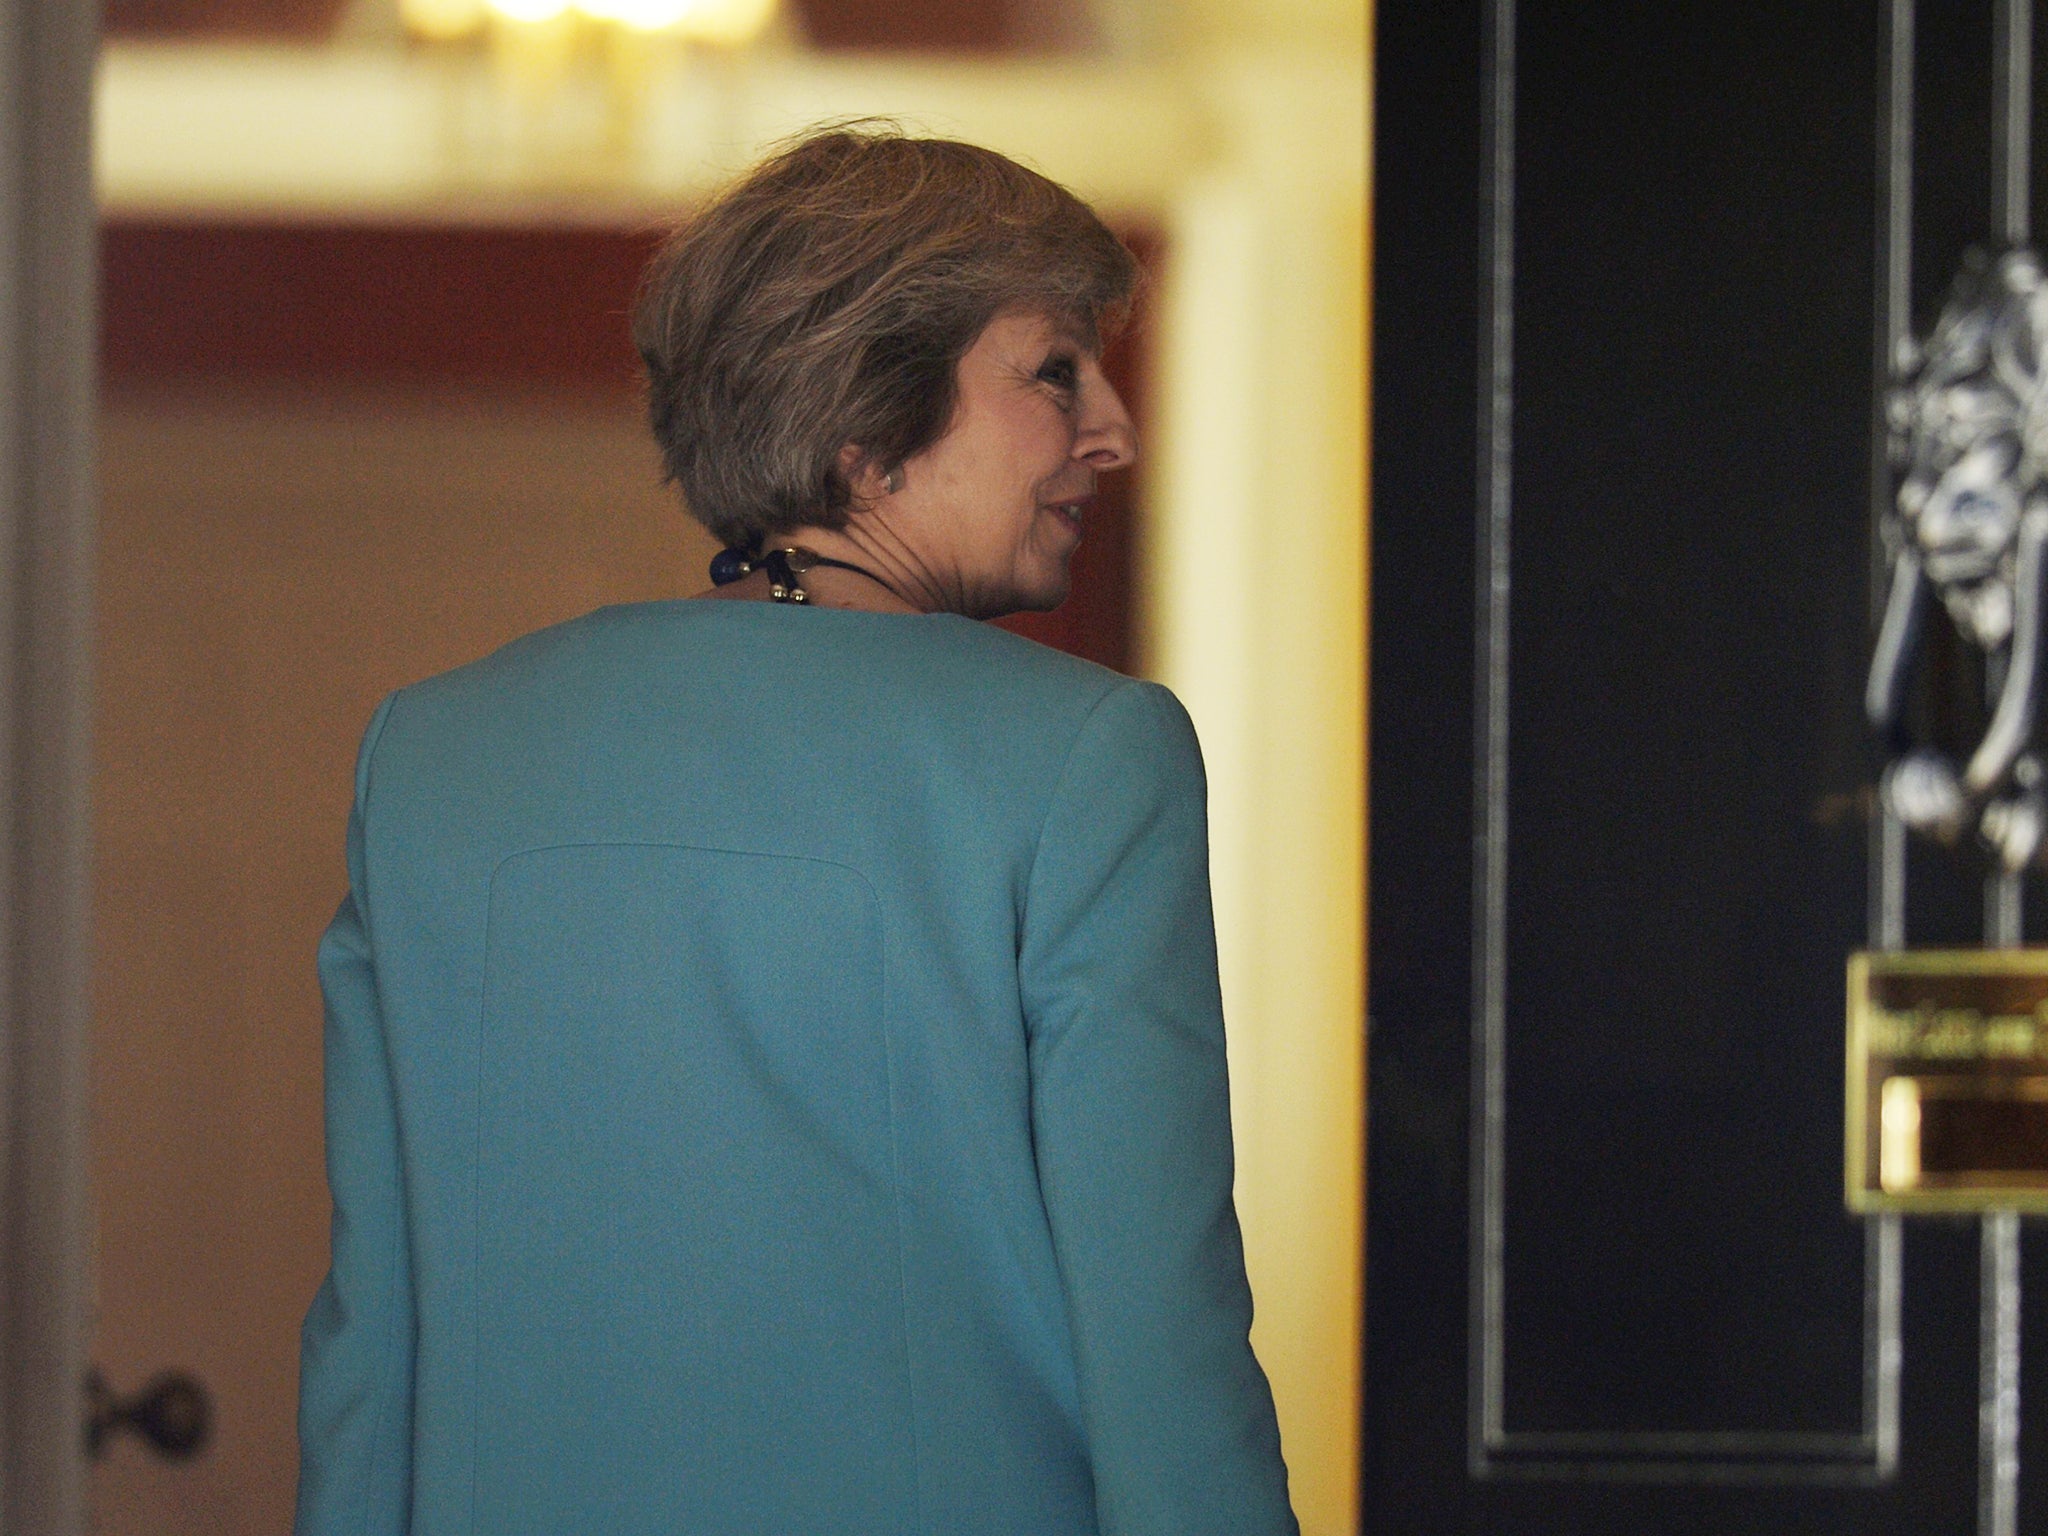 Theresa May has made significant changes to the cabinet since arriving in Downing Street